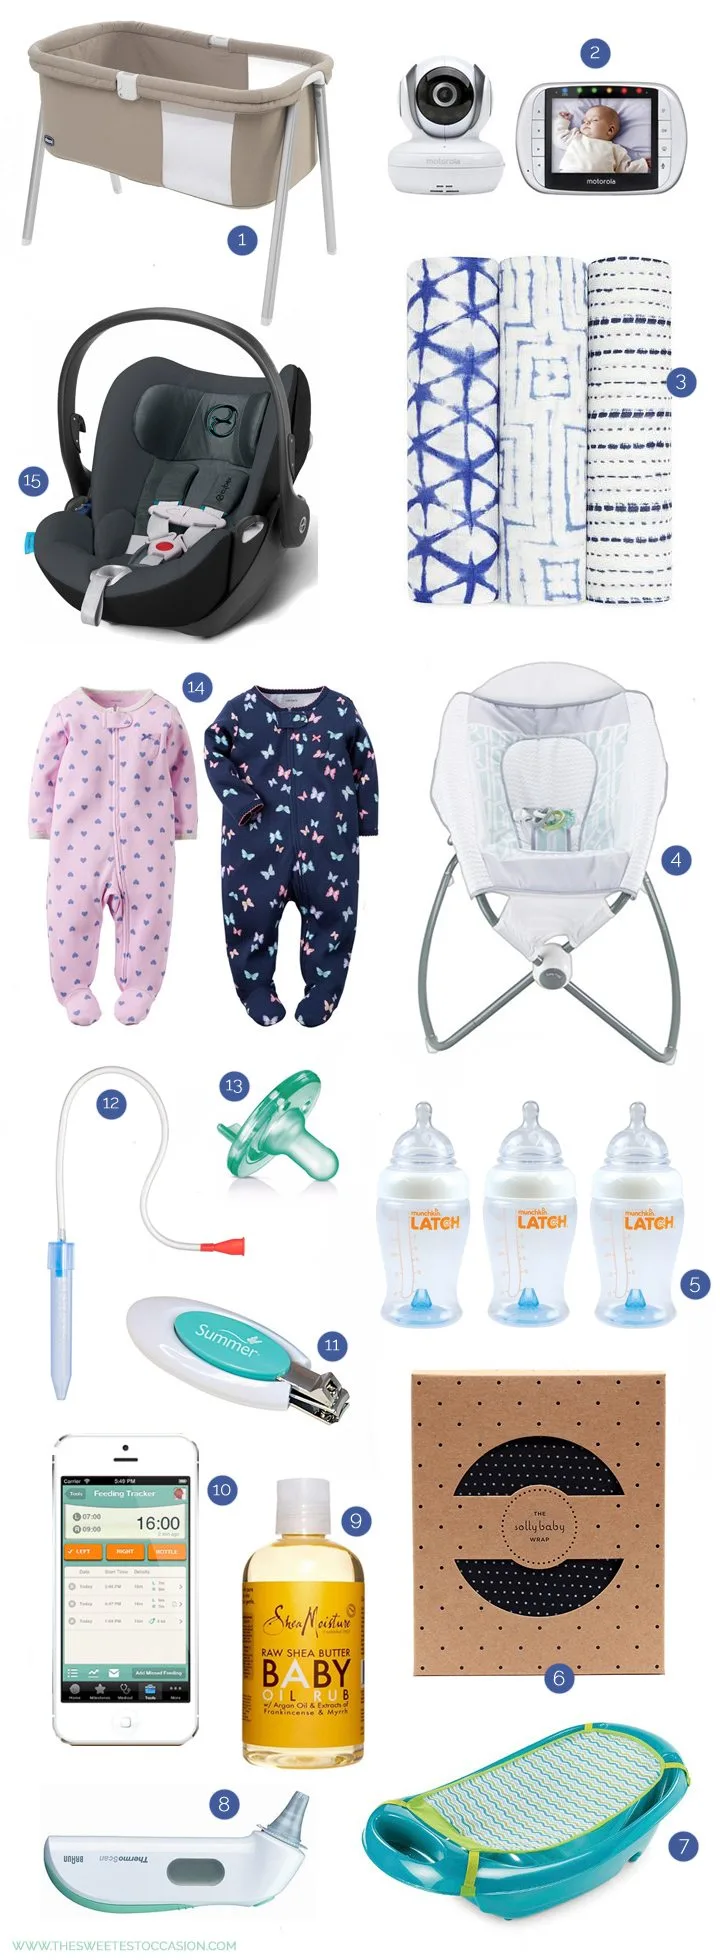 Newborn Baby Essentials | Baby Registry Must-Haves from @cydconverse